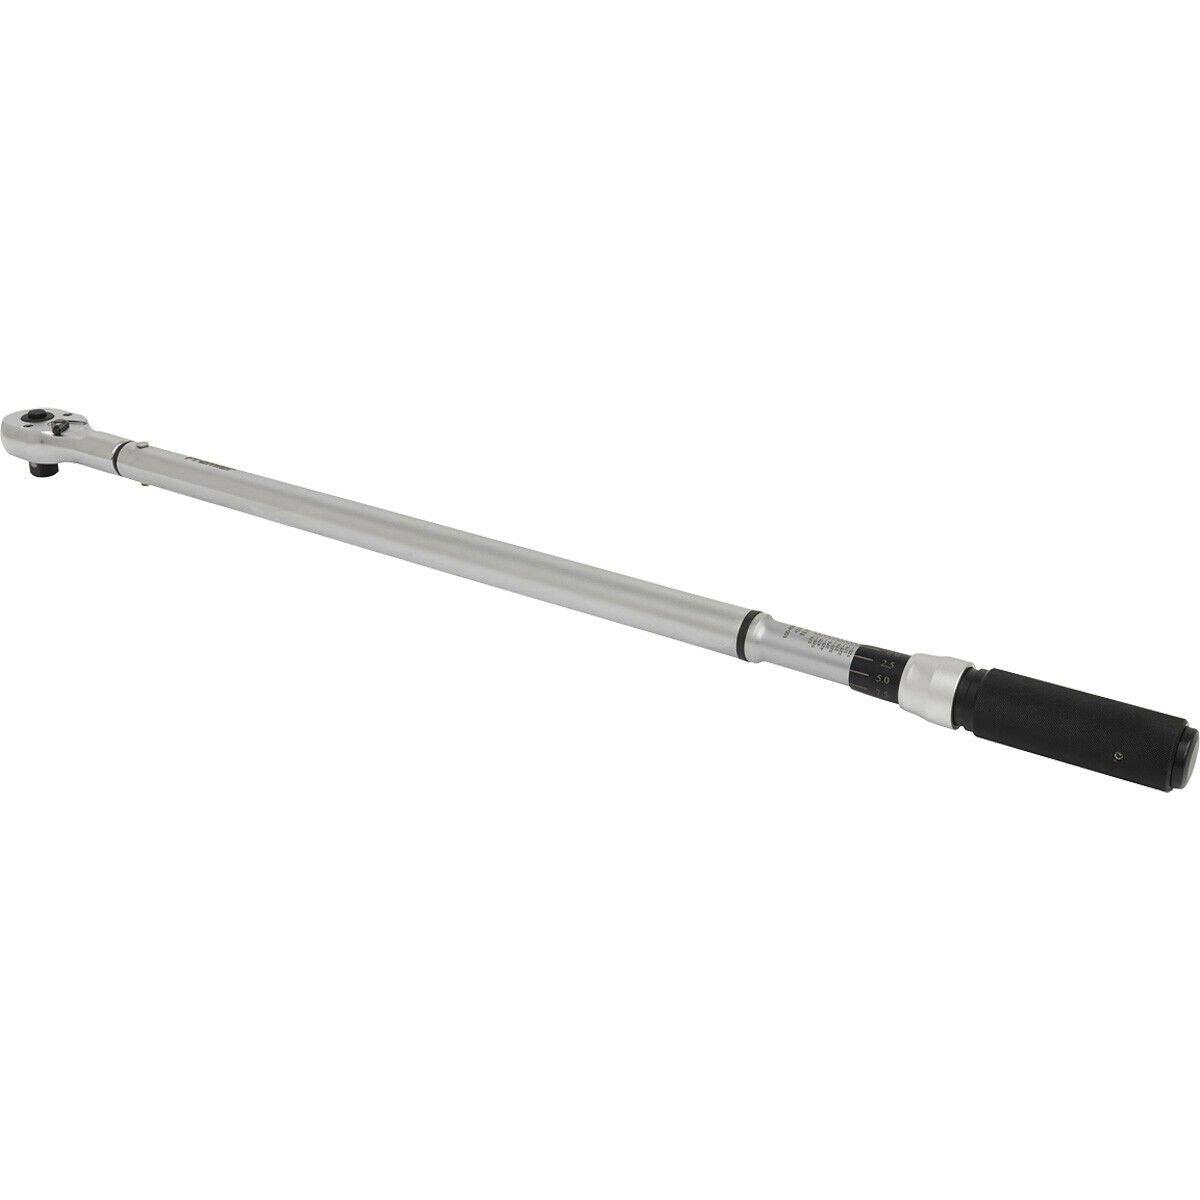 Micrometer Style Torque Wrench - 3/4